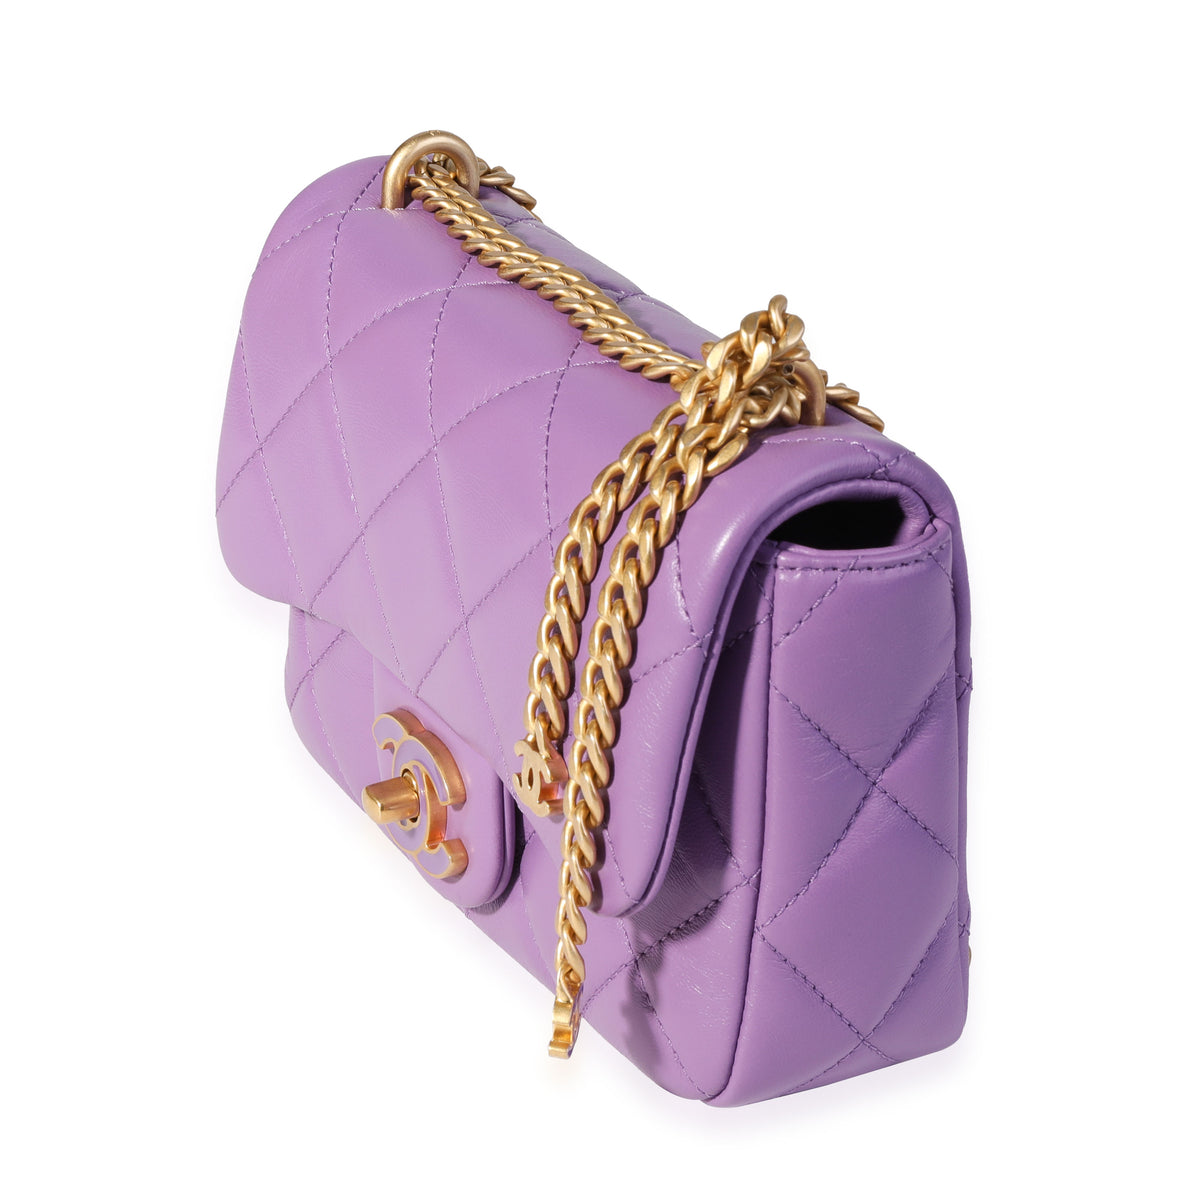 Chanel Purple Quilted Lambskin Mini Square Chain Flap Bag